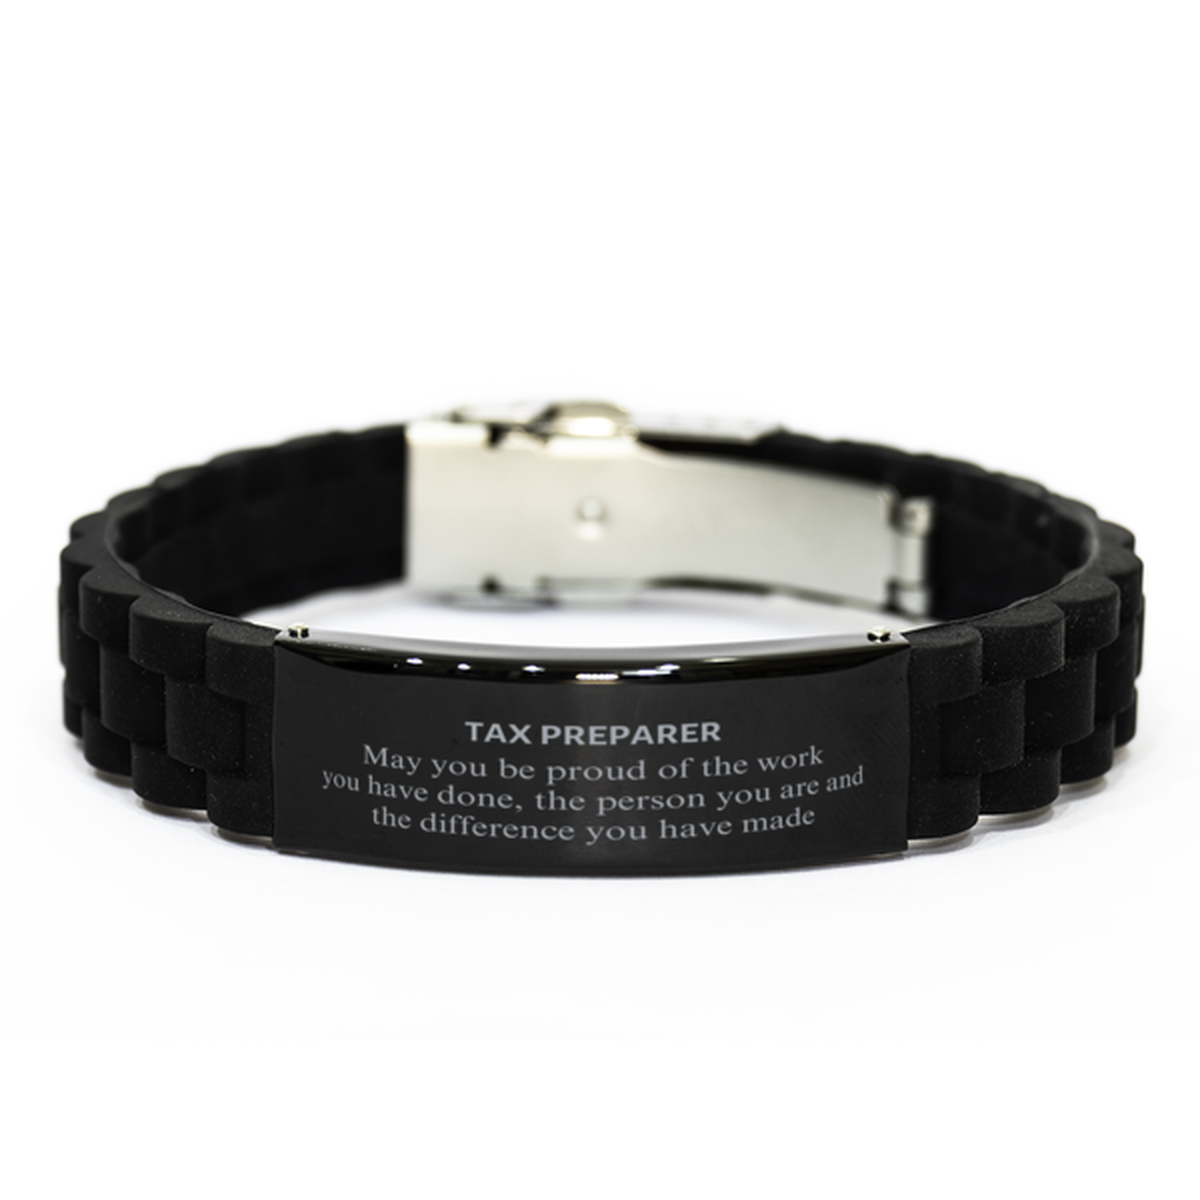 Tax Preparer May you be proud of the work you have done, Retirement Tax Preparer Black Glidelock Clasp Bracelet for Colleague Appreciation Gifts Amazing for Tax Preparer